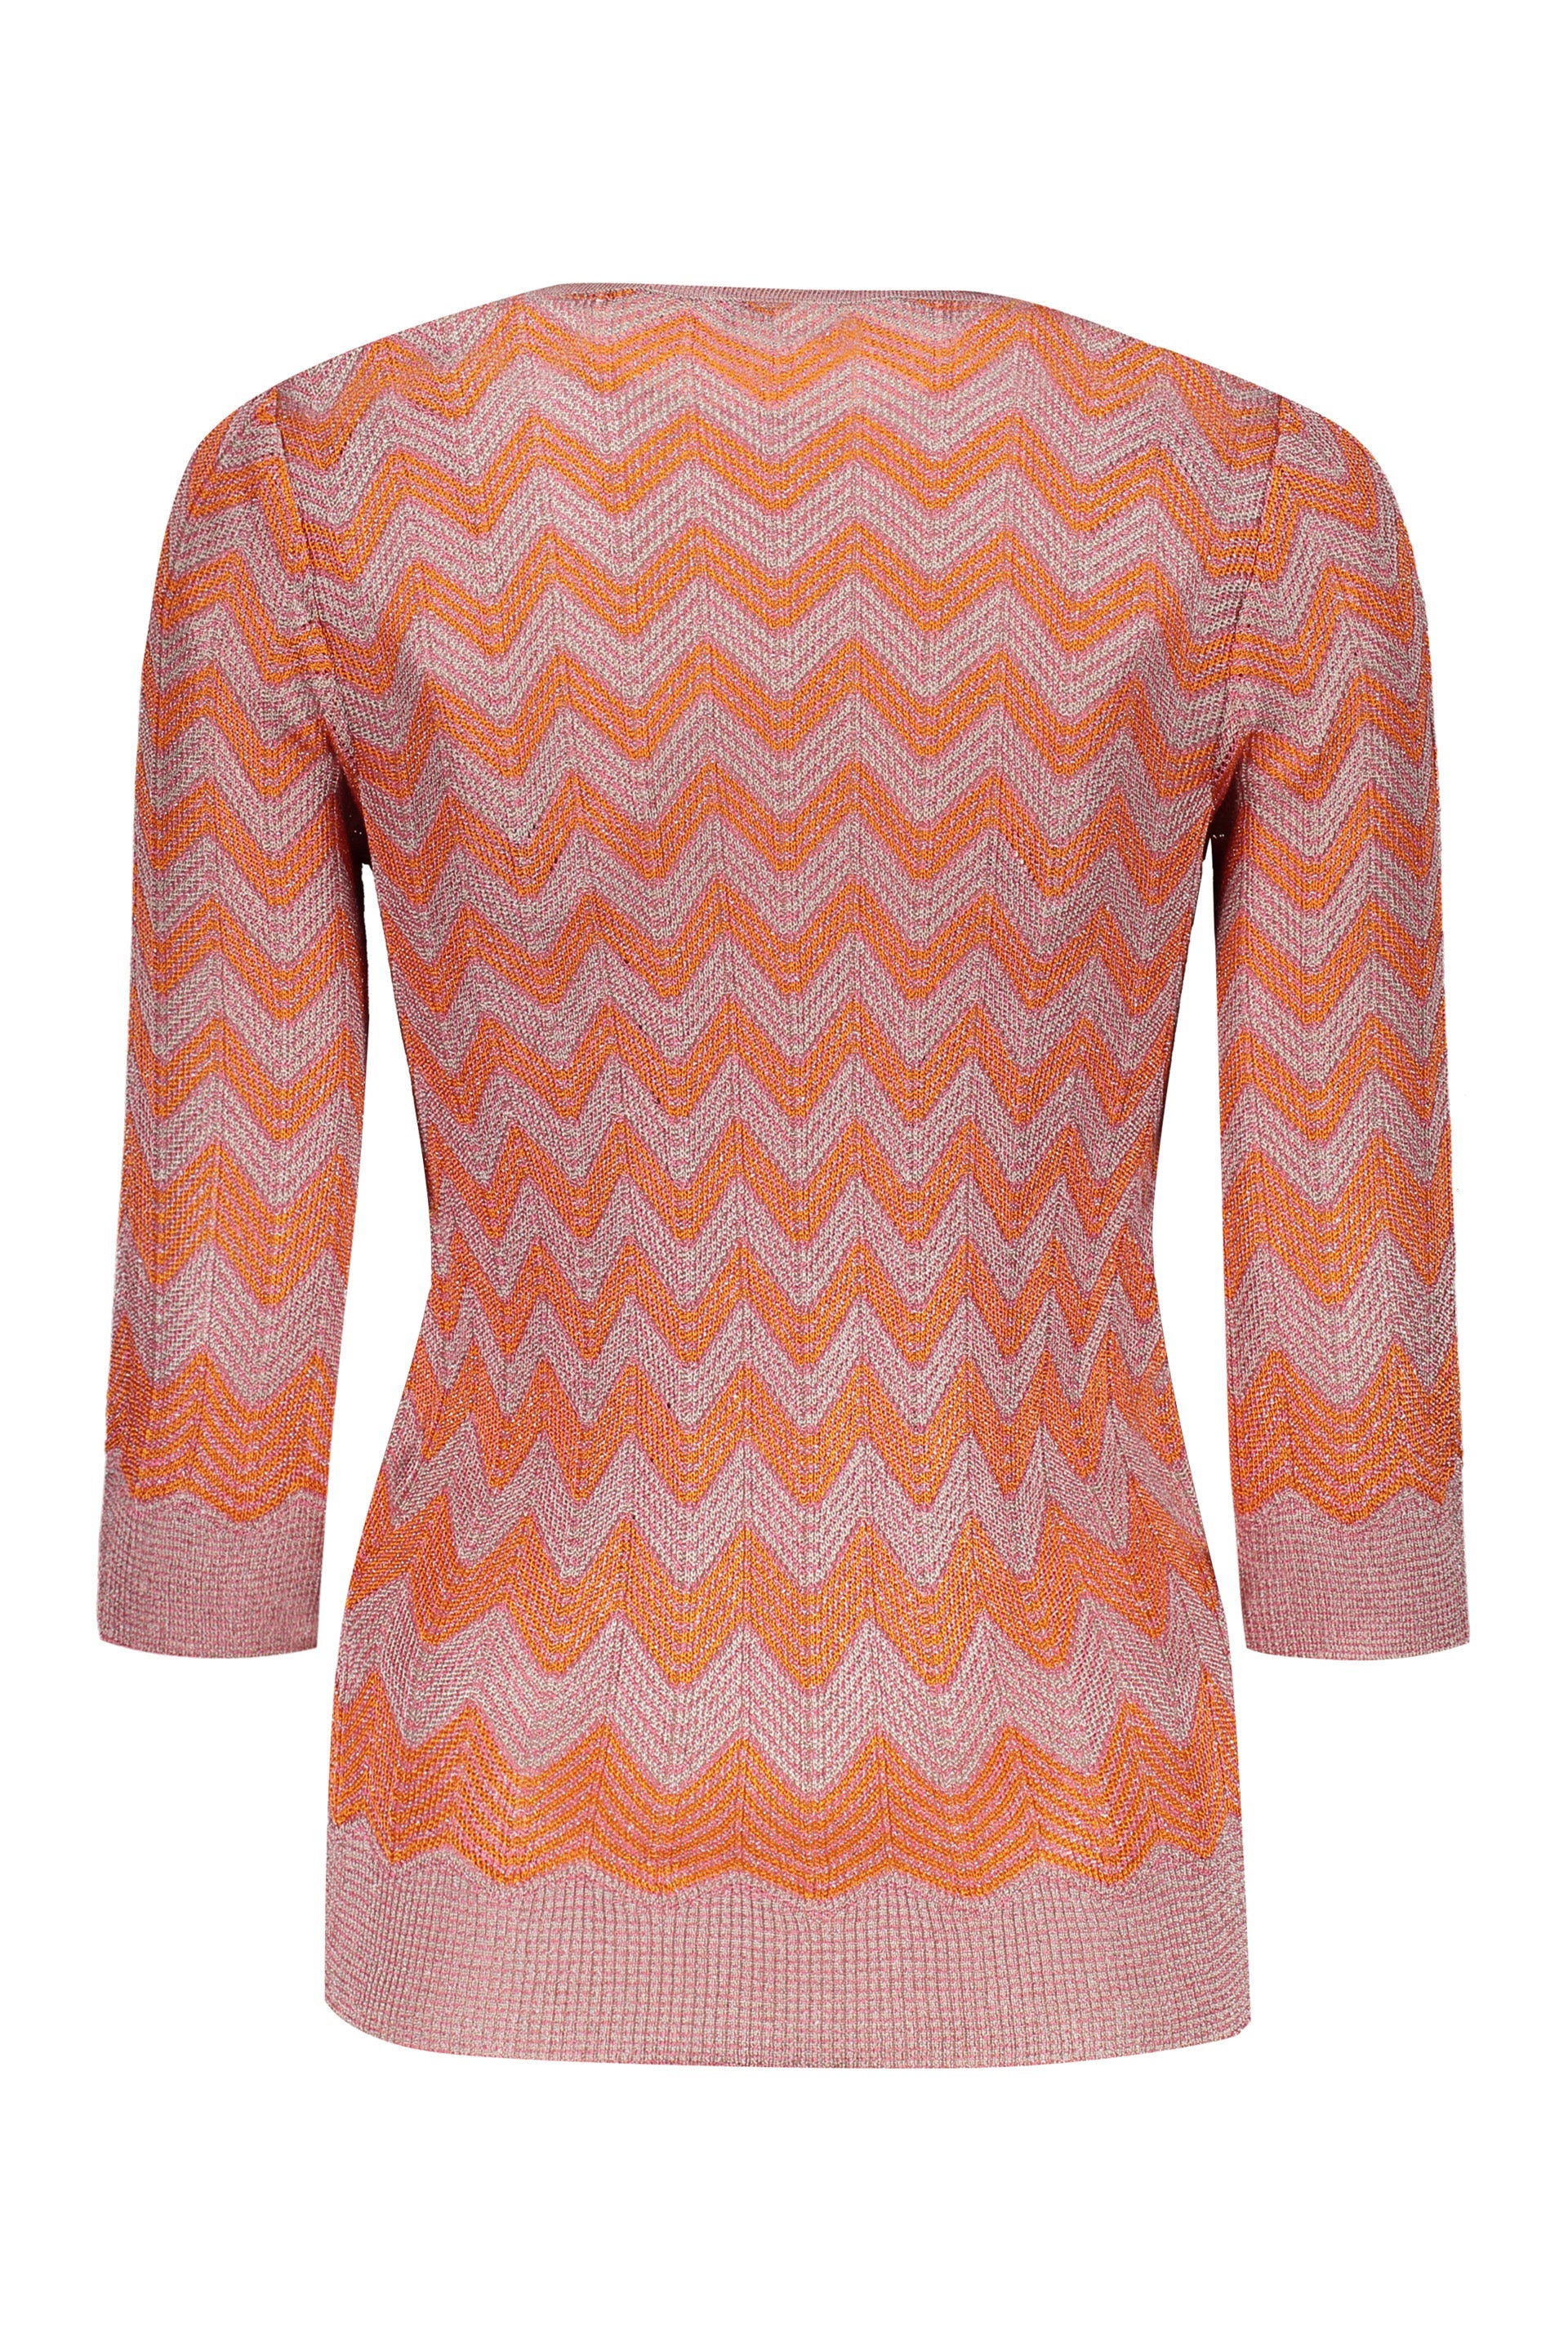 Missoni-OUTLET-SALE-Knitted-top-Shirts-ARCHIVE-COLLECTION-2_c06bdce3-d3dd-4d66-970b-166de3aed85b.jpg